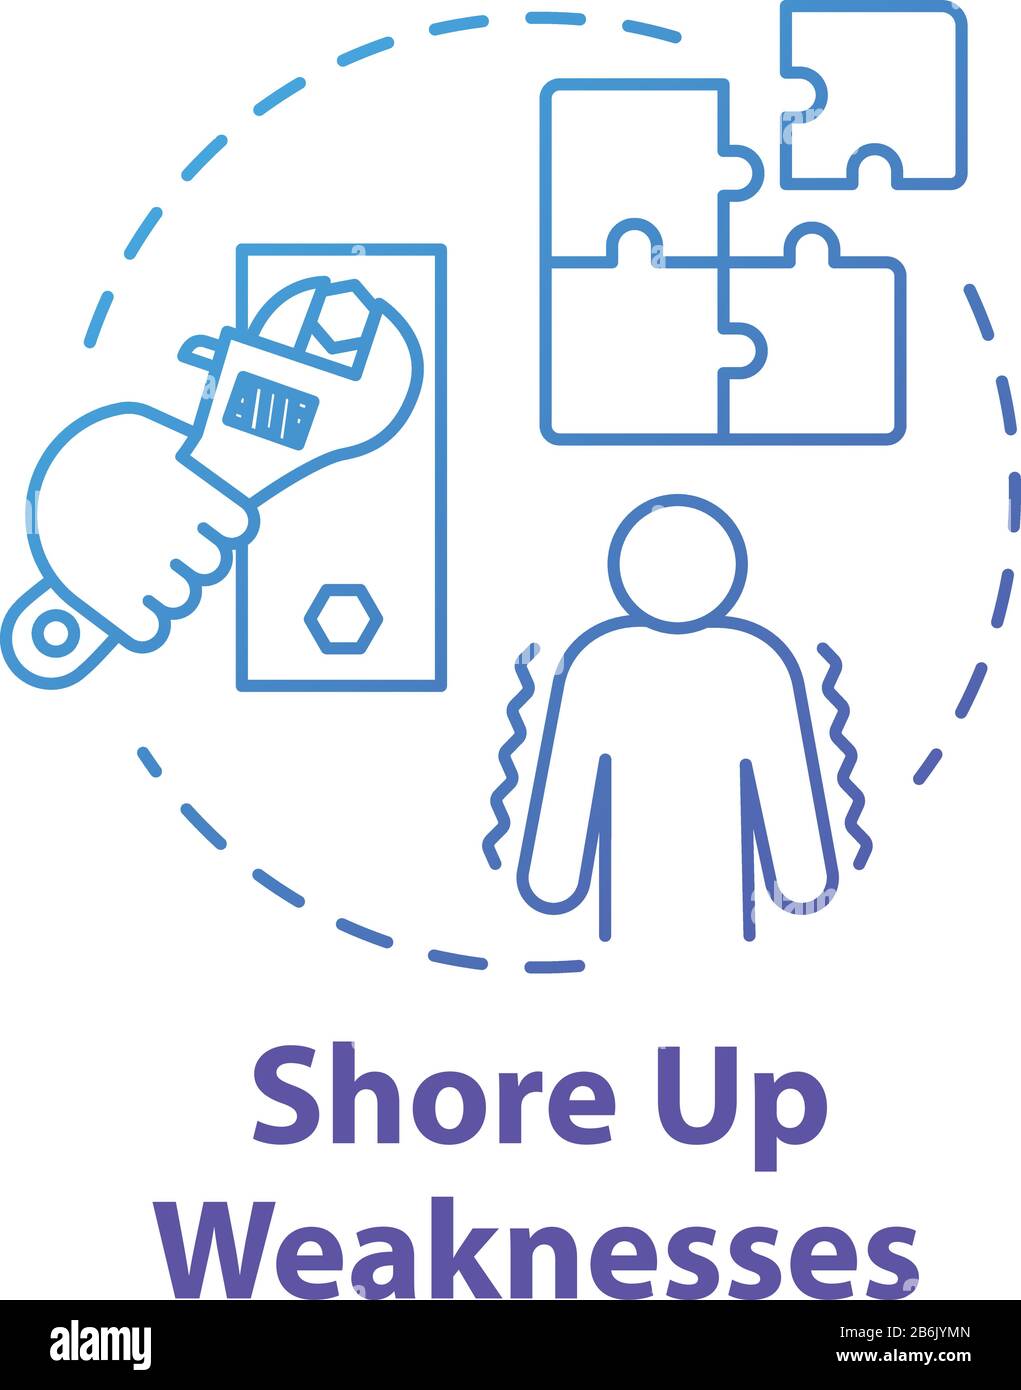 Shore up weaknesses concept icon. Avoid disadvantage. Goal planning. Development and improvement. SWOT strategy. Self-building idea thin line Stock Vector